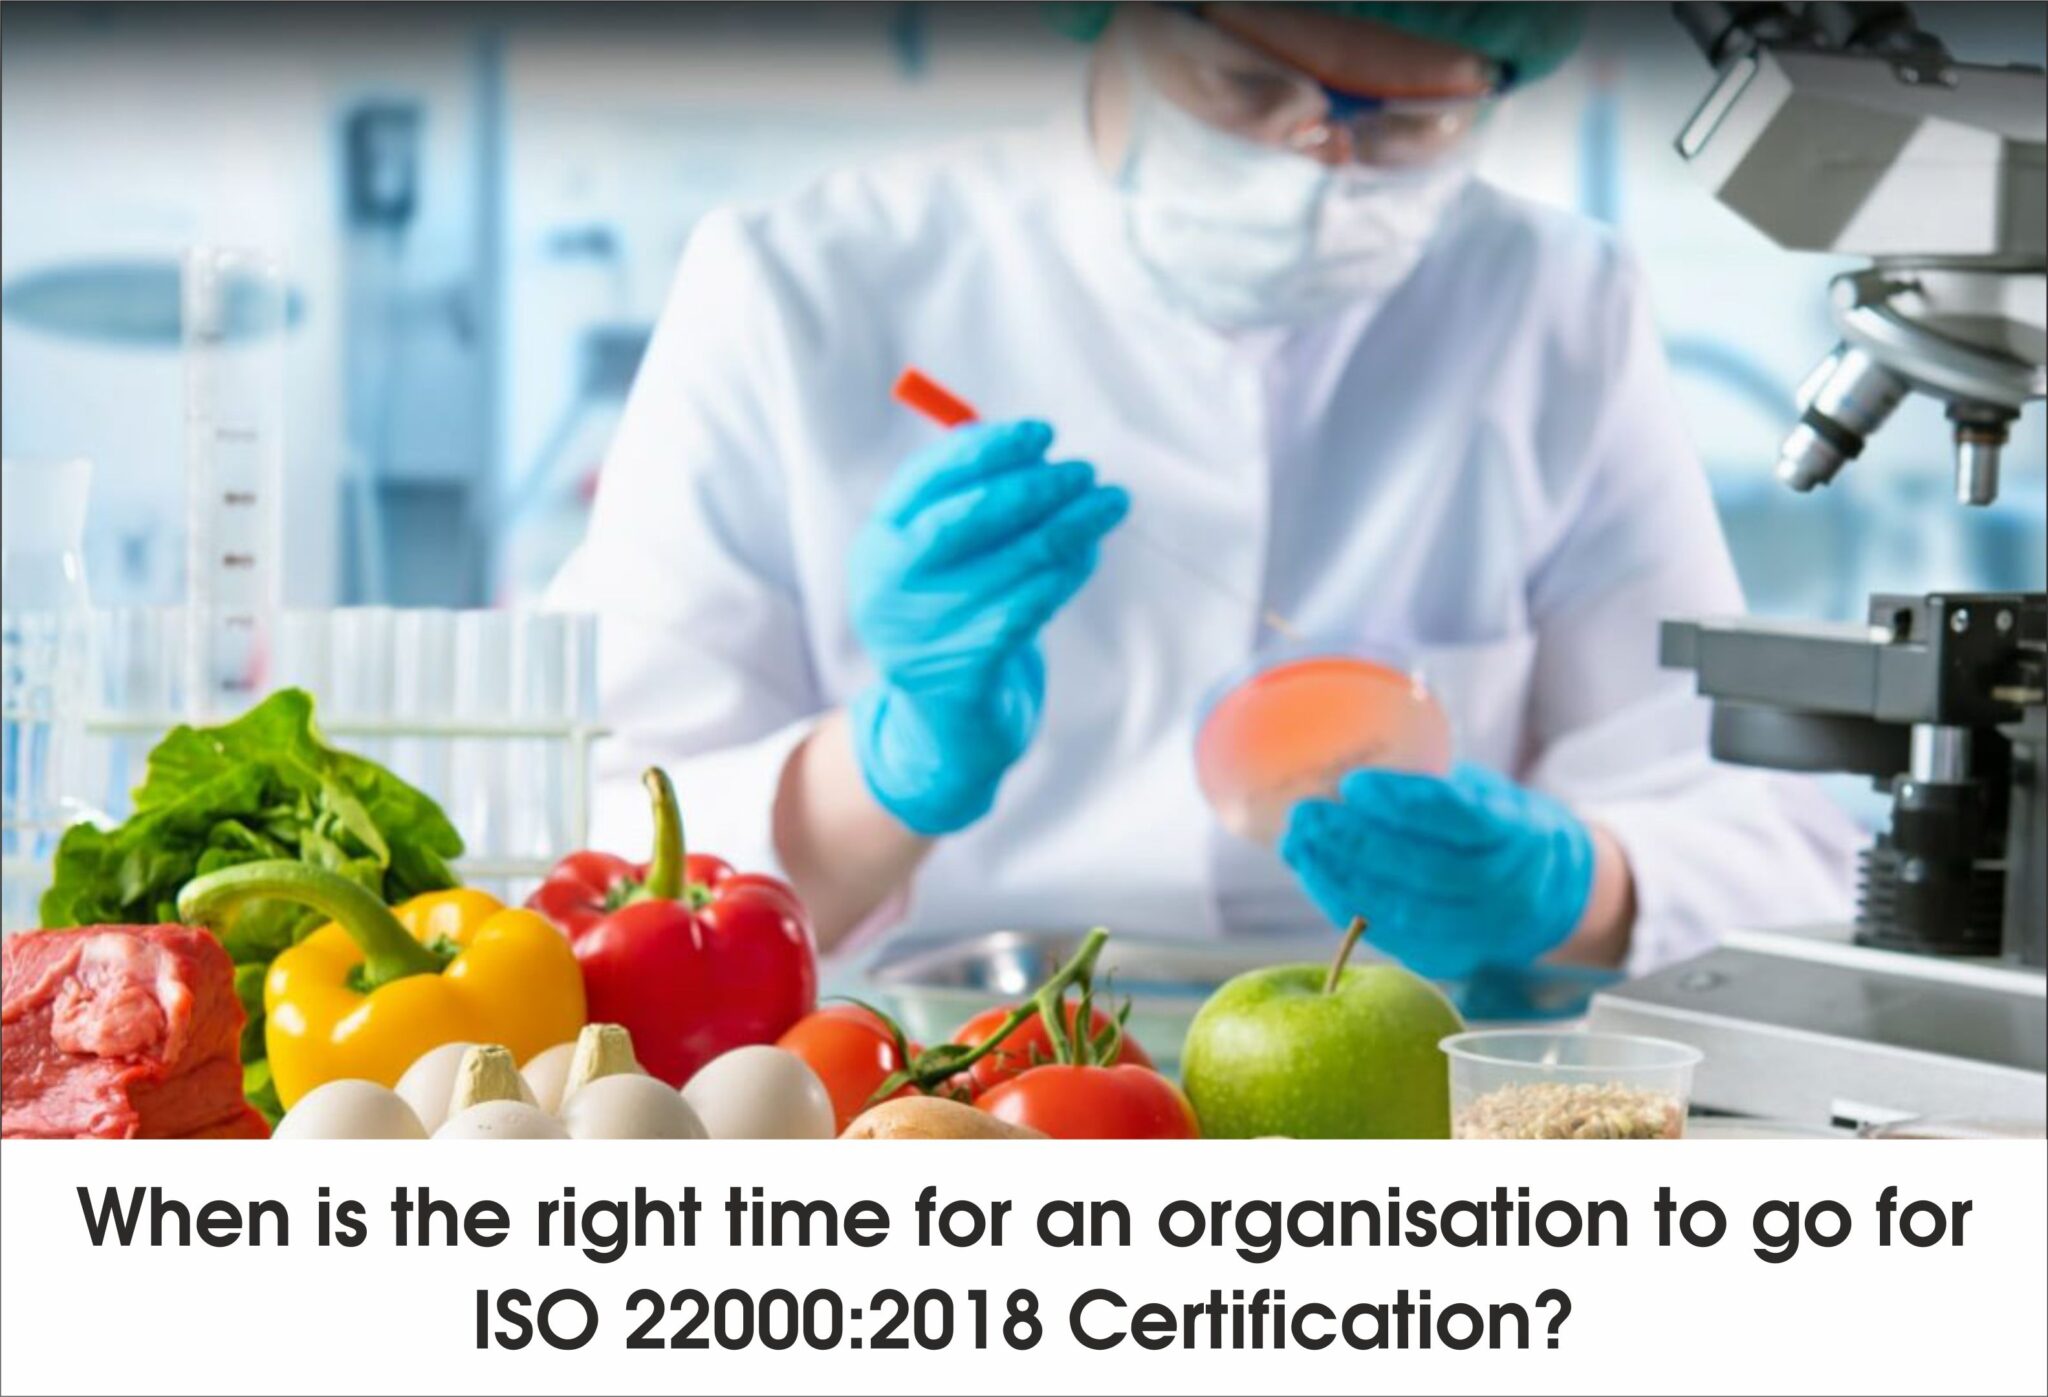 When is the right time for an organisation to go for ISO 22000:2018 Certification?